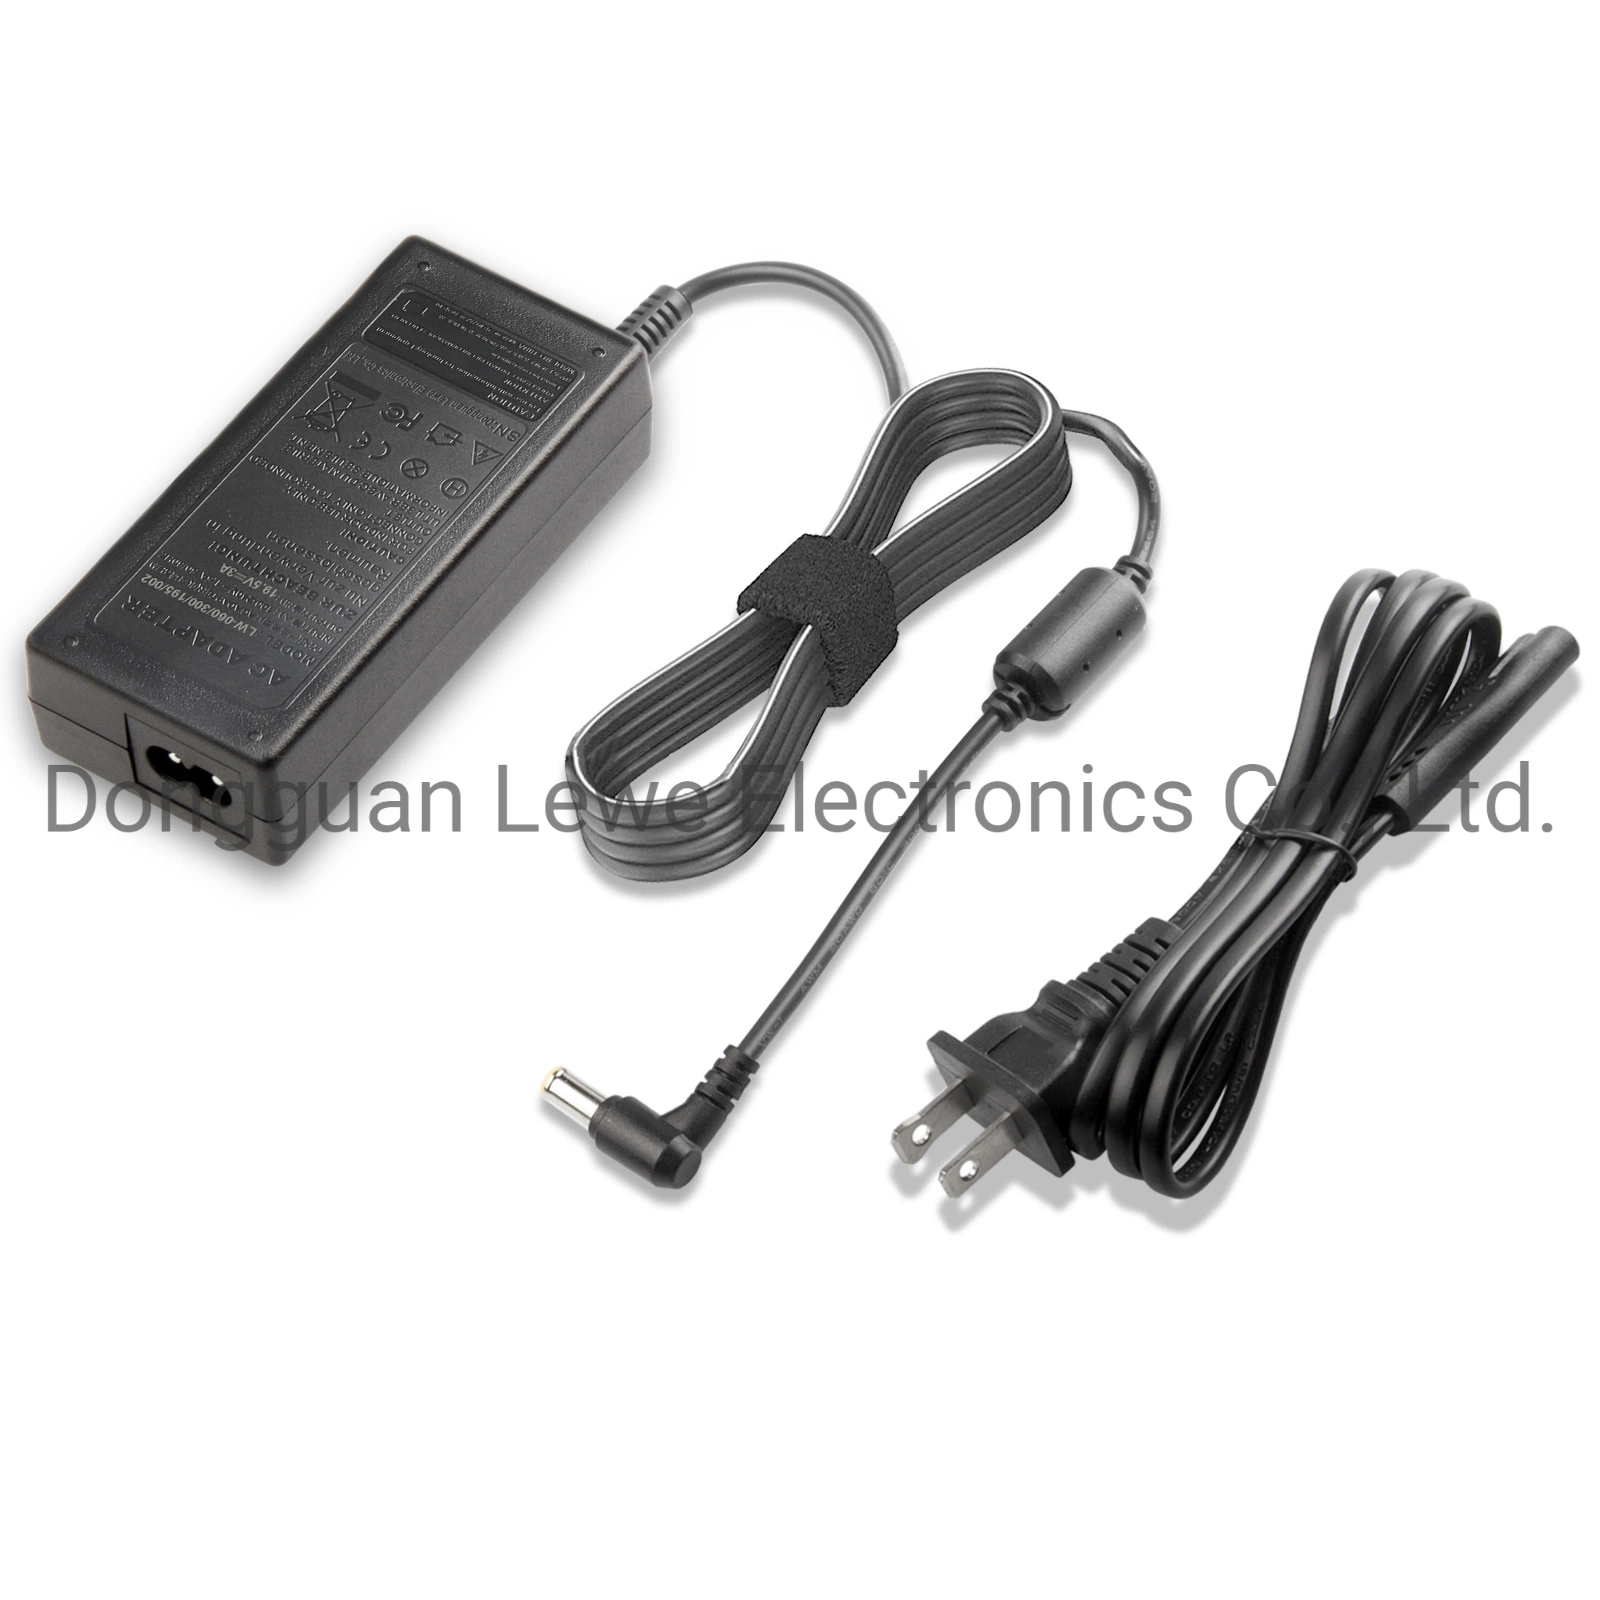 20V 2.25A 45W AC Power Adapter Charger for Lenovo Adlx45nlc3a Adlx45ncc3a Adlx45ndc3a Adlx45ncc2a Adlx45nlc2a